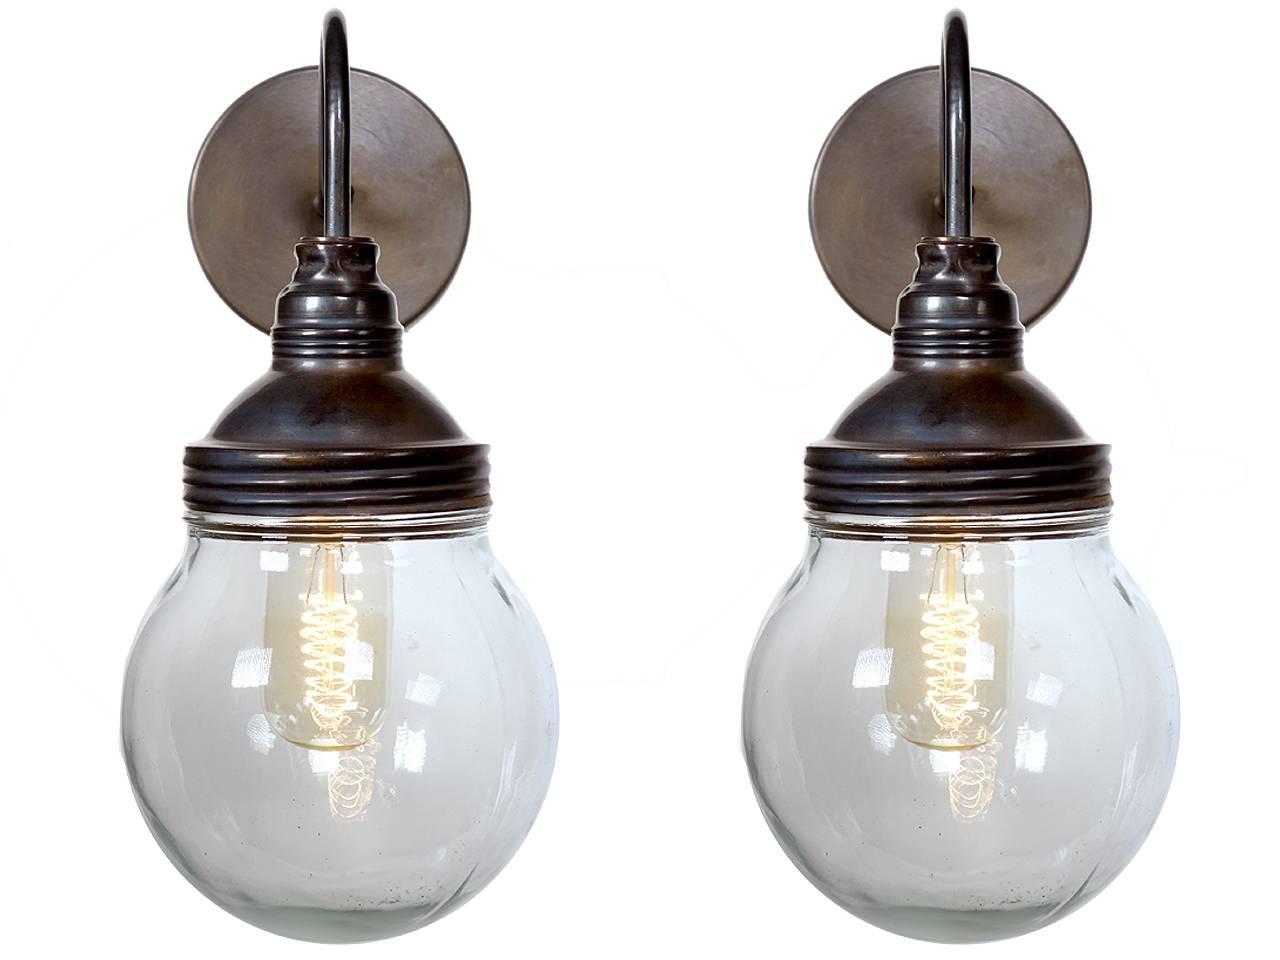 This is a Classic design in Industrial lighting. Its elegant simplicity and quality explosion proof construction give it just the right look. It has a brass screw in top and extra thick 6